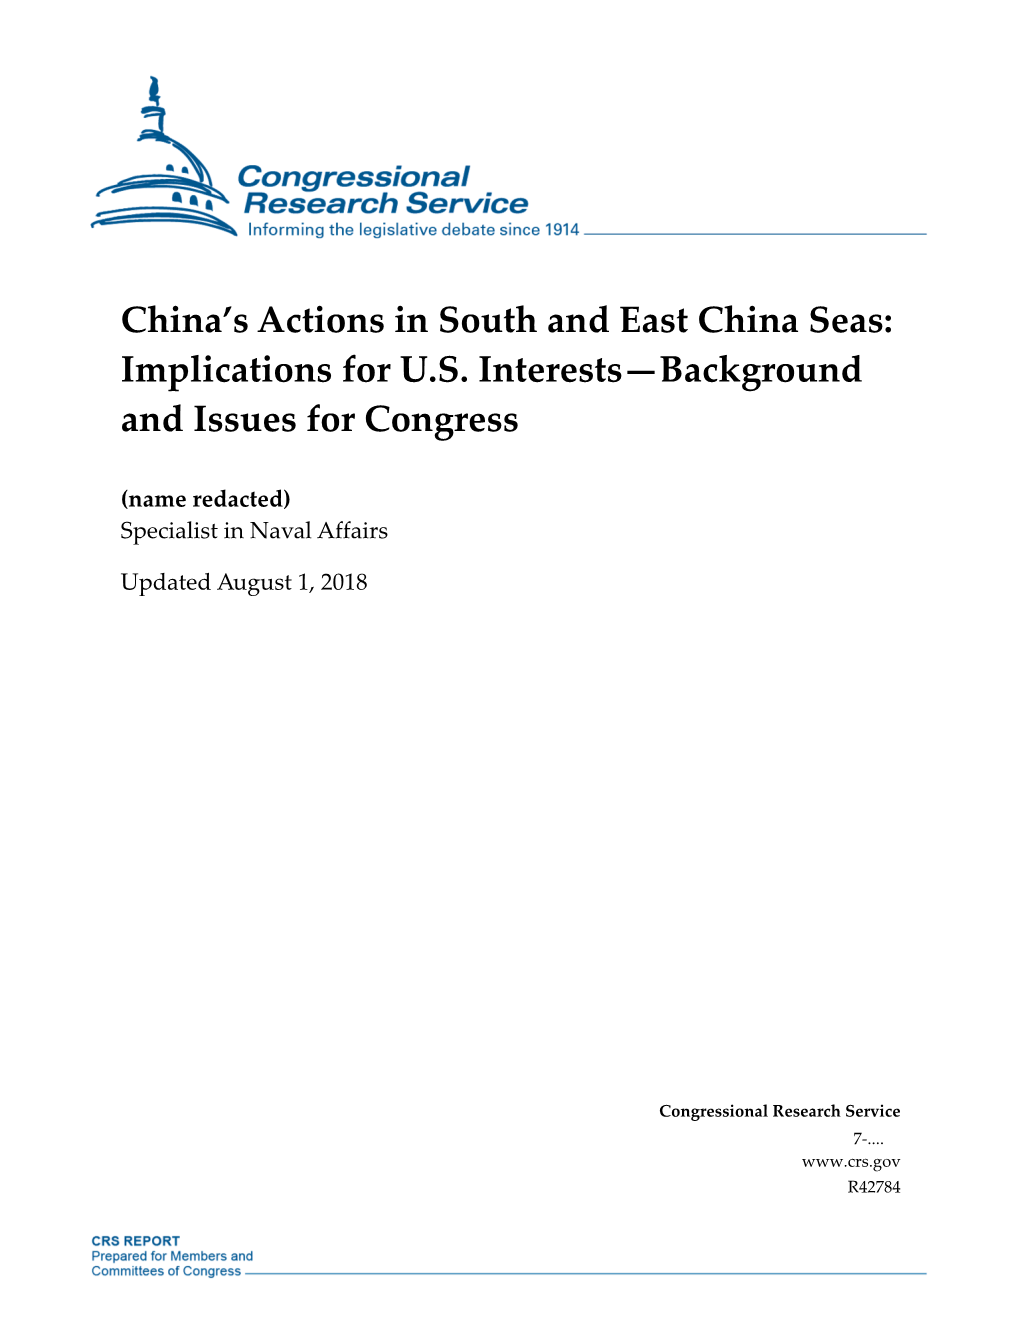 China's Actions in South and East China Seas: Implications for U.S